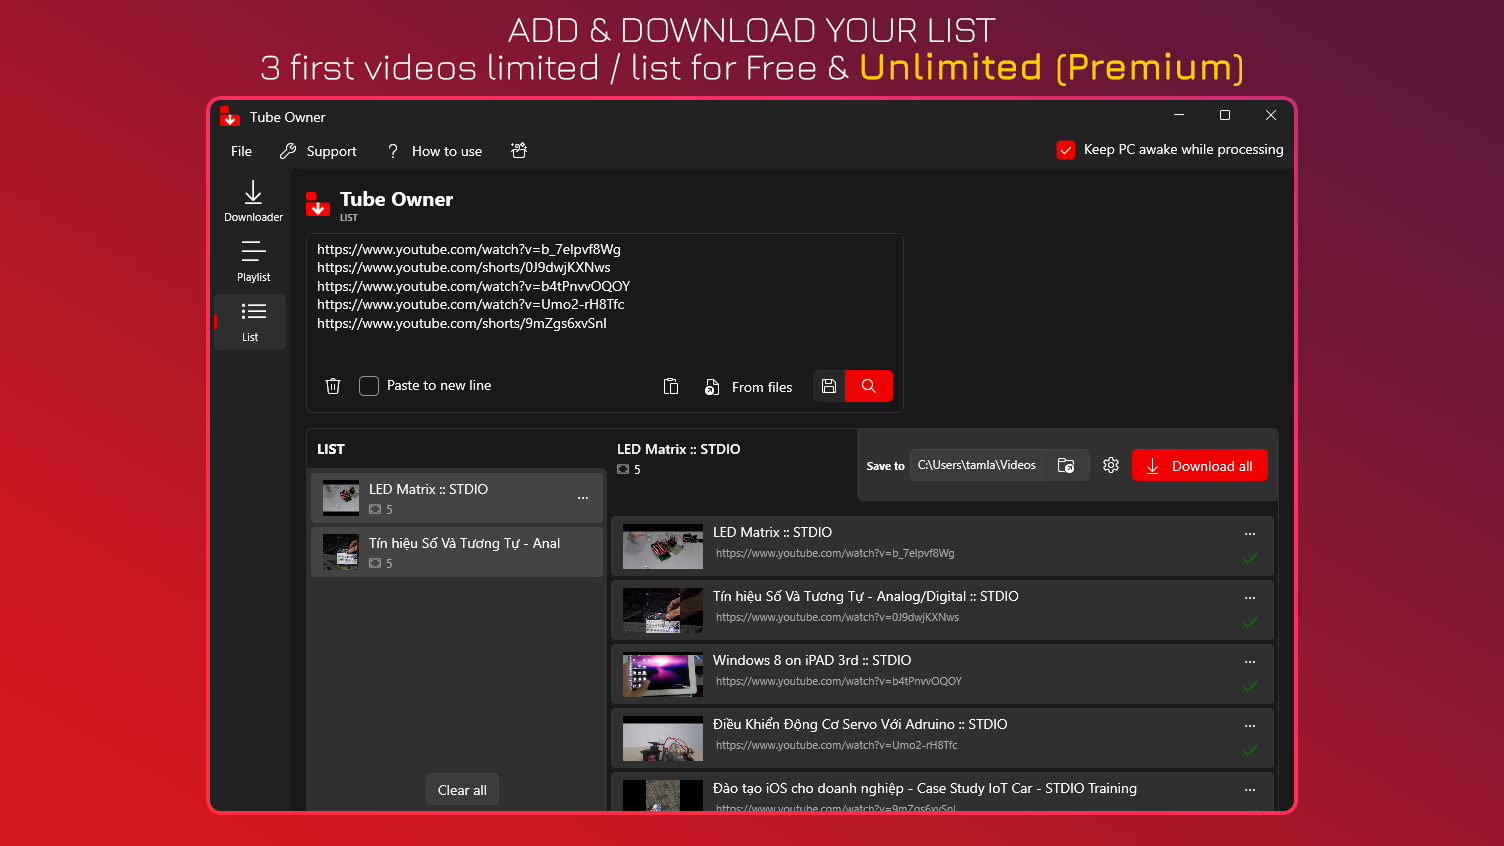 Add & Download Your List - 3 first videos limited / list for Free & Unlimited (Premium)